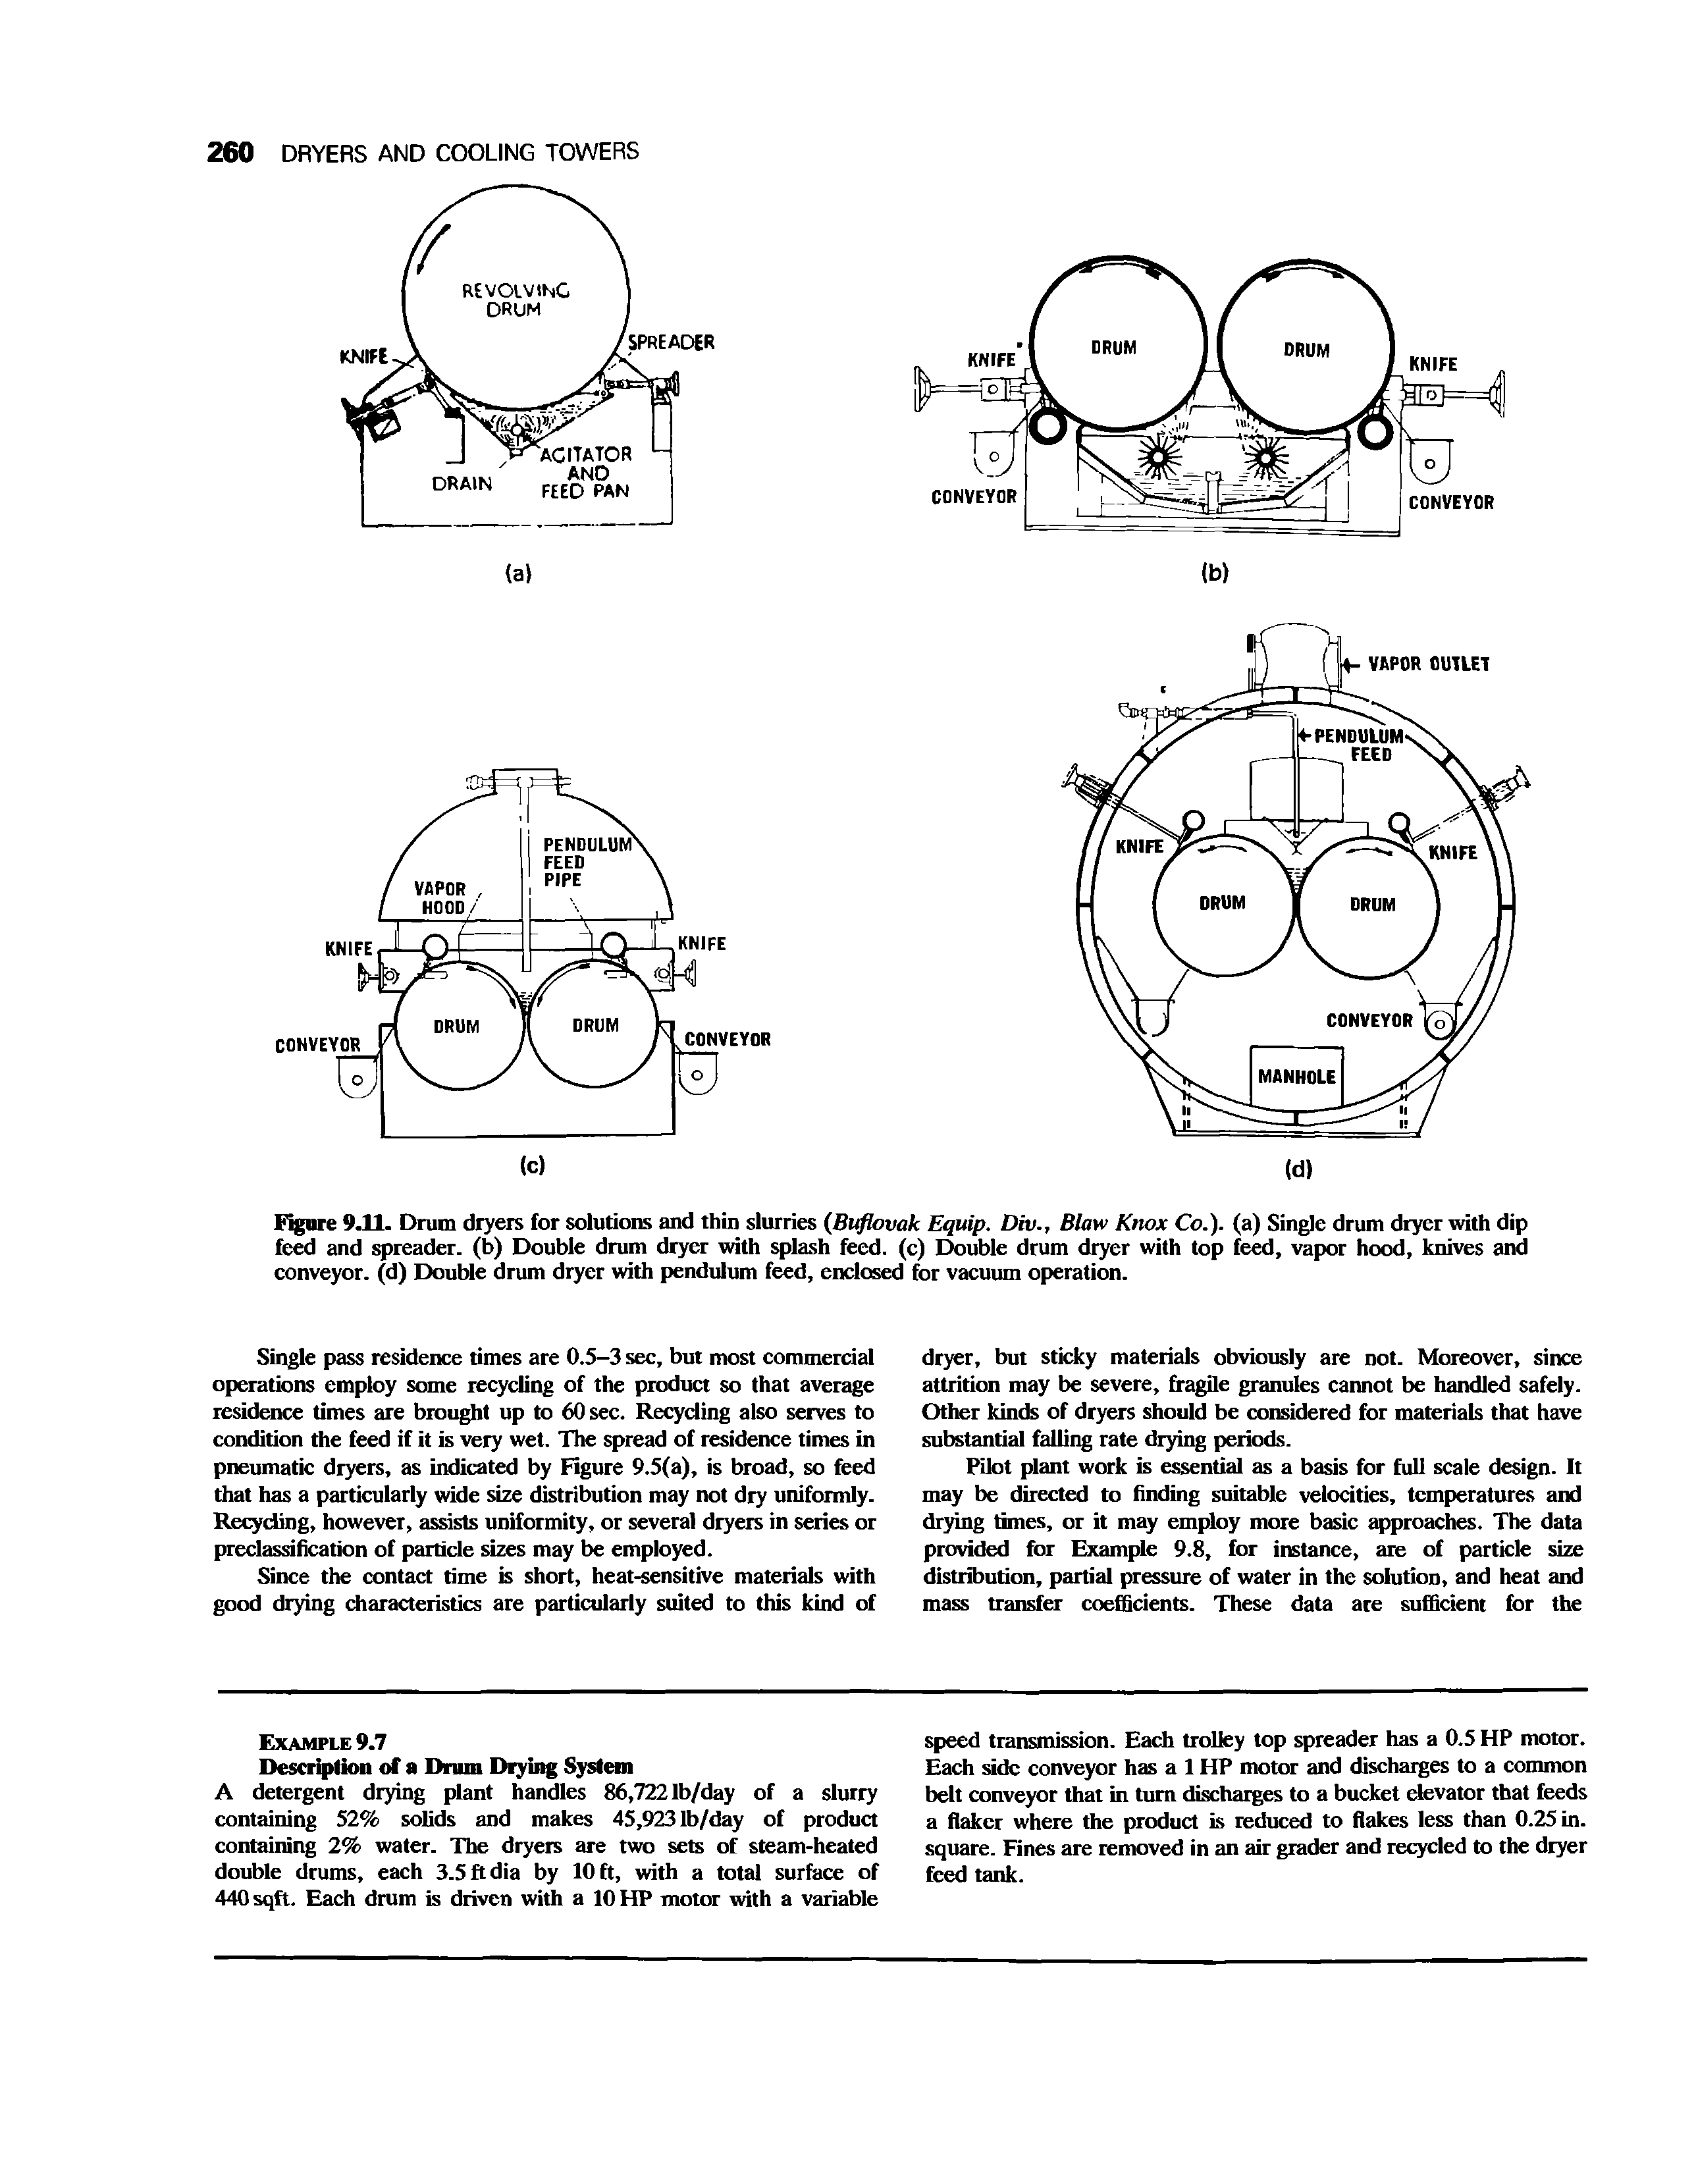 Figure 9.11. Drum dryers for solutions and thin slurries (Buflovak Equip. Div., Blow Knox Co.), (a) Single drum dryer with dip feed and spreader, (b) Double drum dryer with splash feed, (c) Double drum dryer with top feed, vapor hood, knives and conveyor, (d) Double drum dryer with pendulum feed, enclosed for vacuum operation.